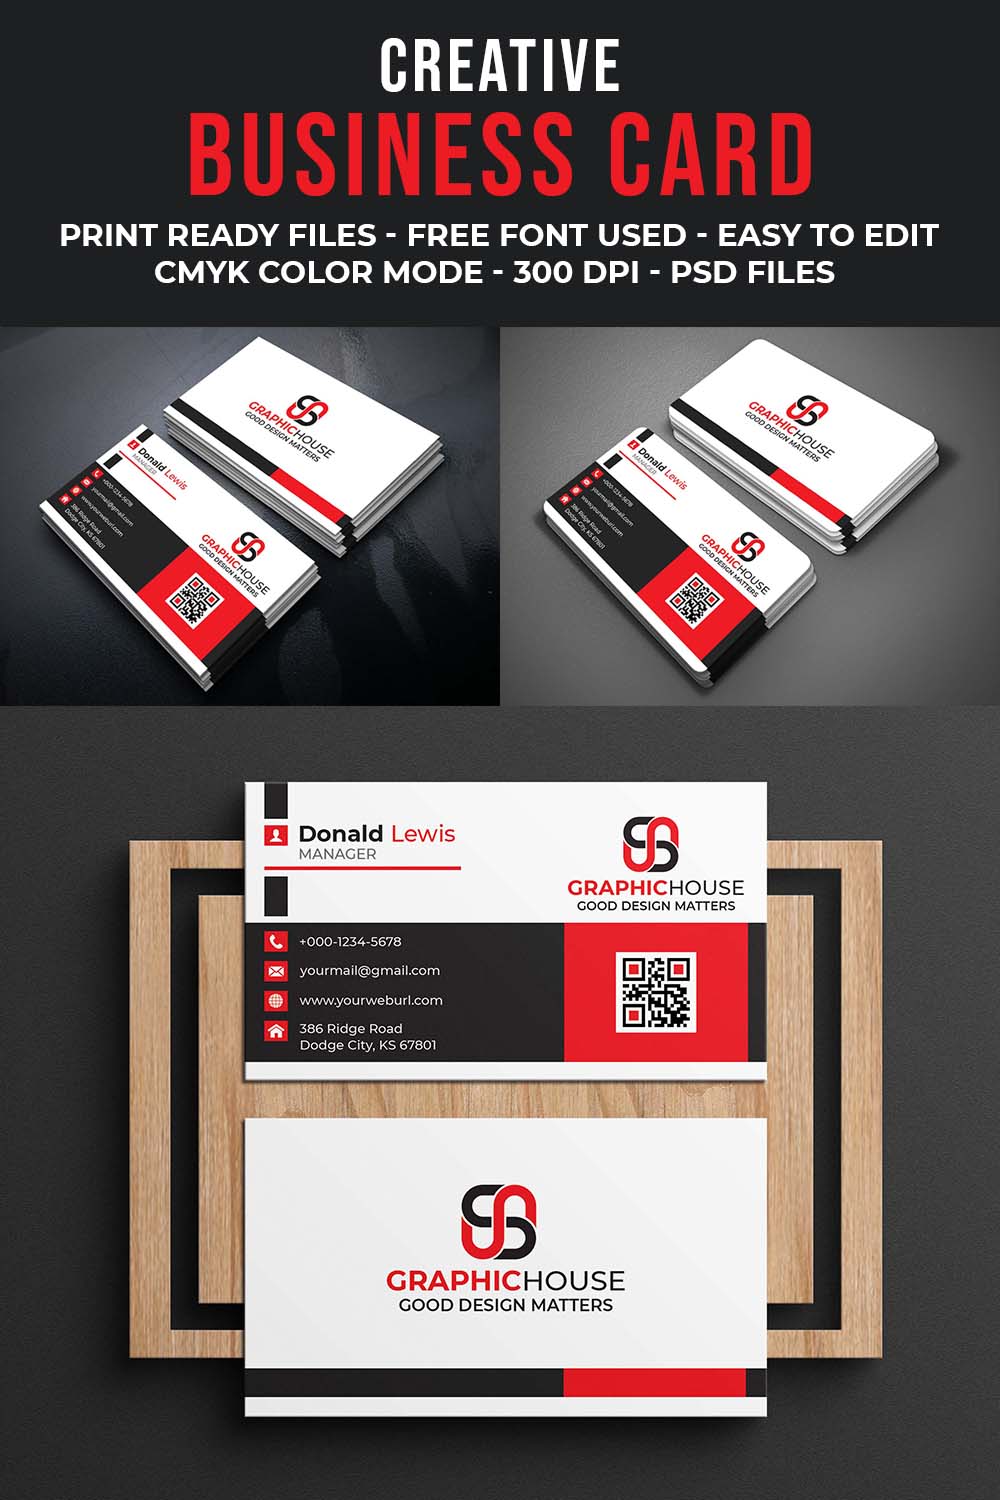 Stylish And Professional Business Card Template Pinterest Image.